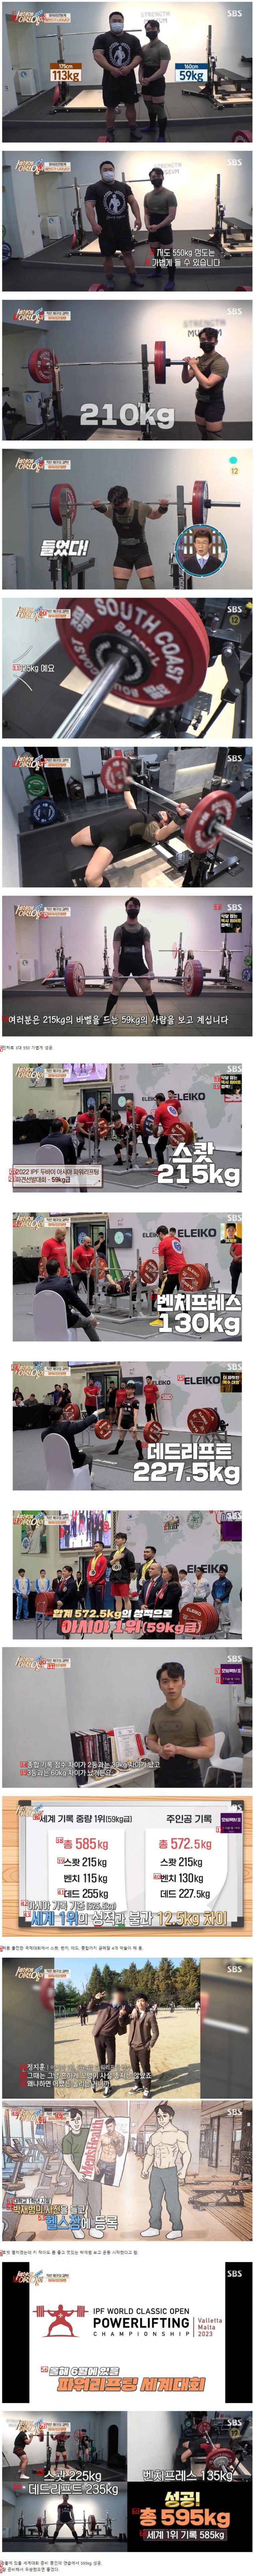 He's 160cm and 59kg, but he cracks his teeth because he's lifting his teeth lightly.